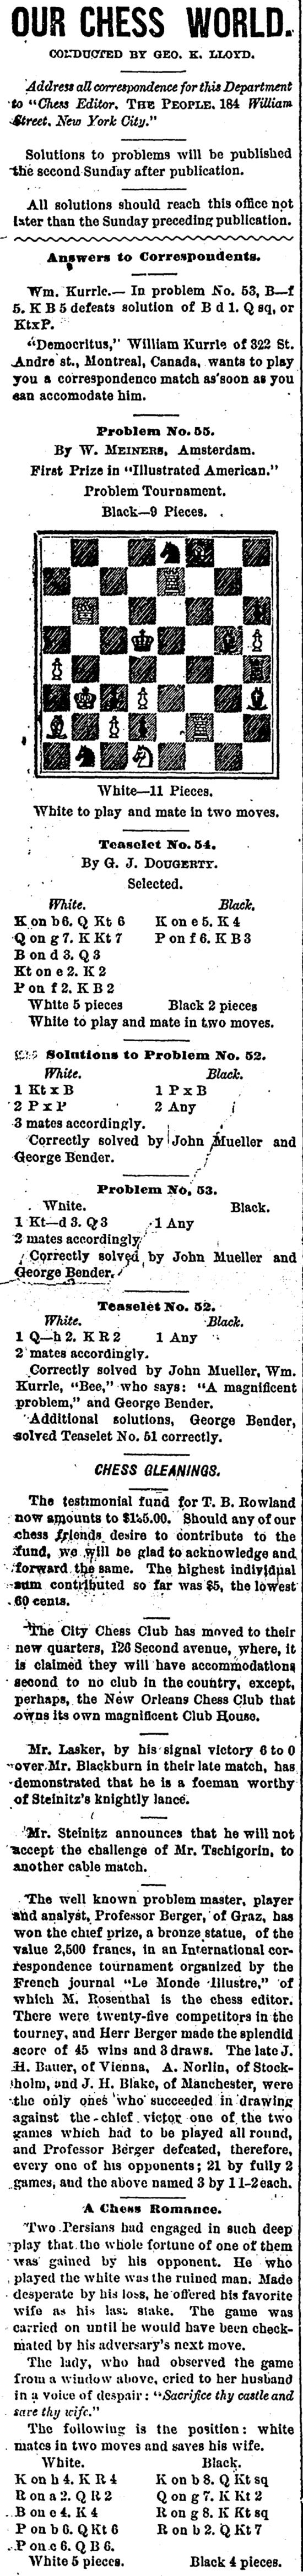 1892.06.26-01 New York People.png